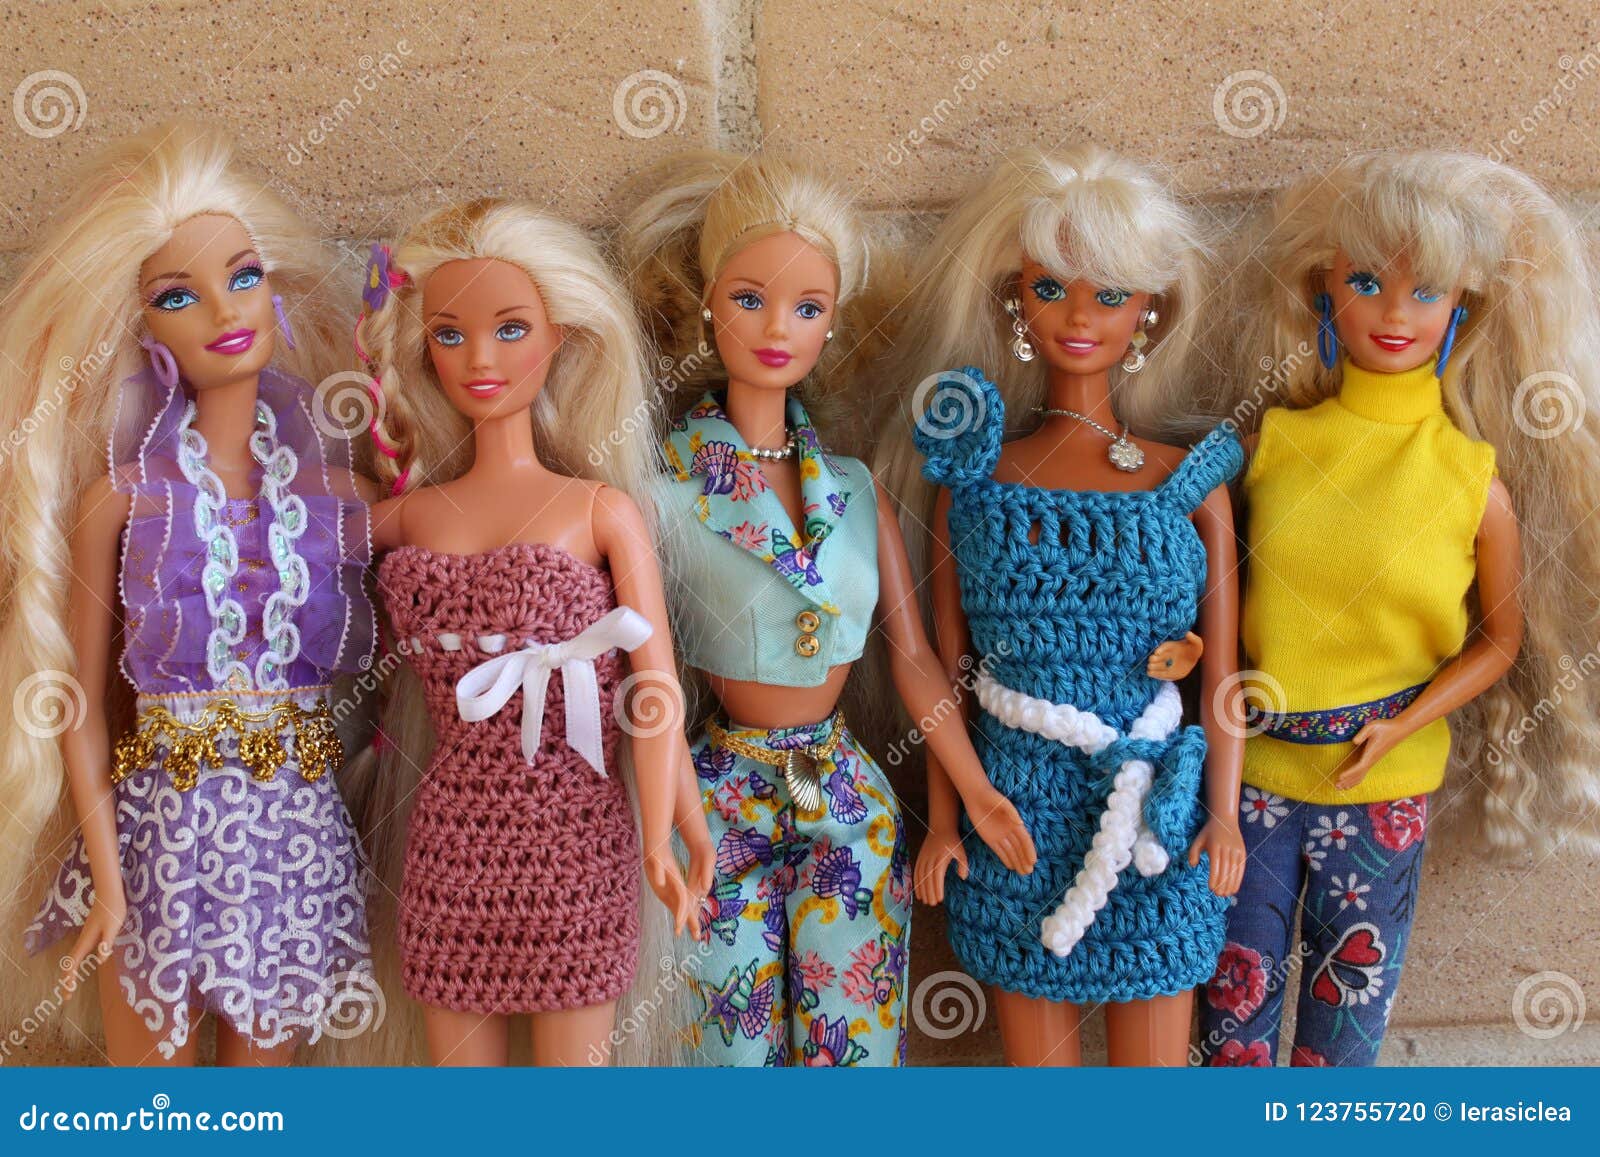 Barbie Dolls Whit 80s and 90s Outfits Editorial Image - Image of ...